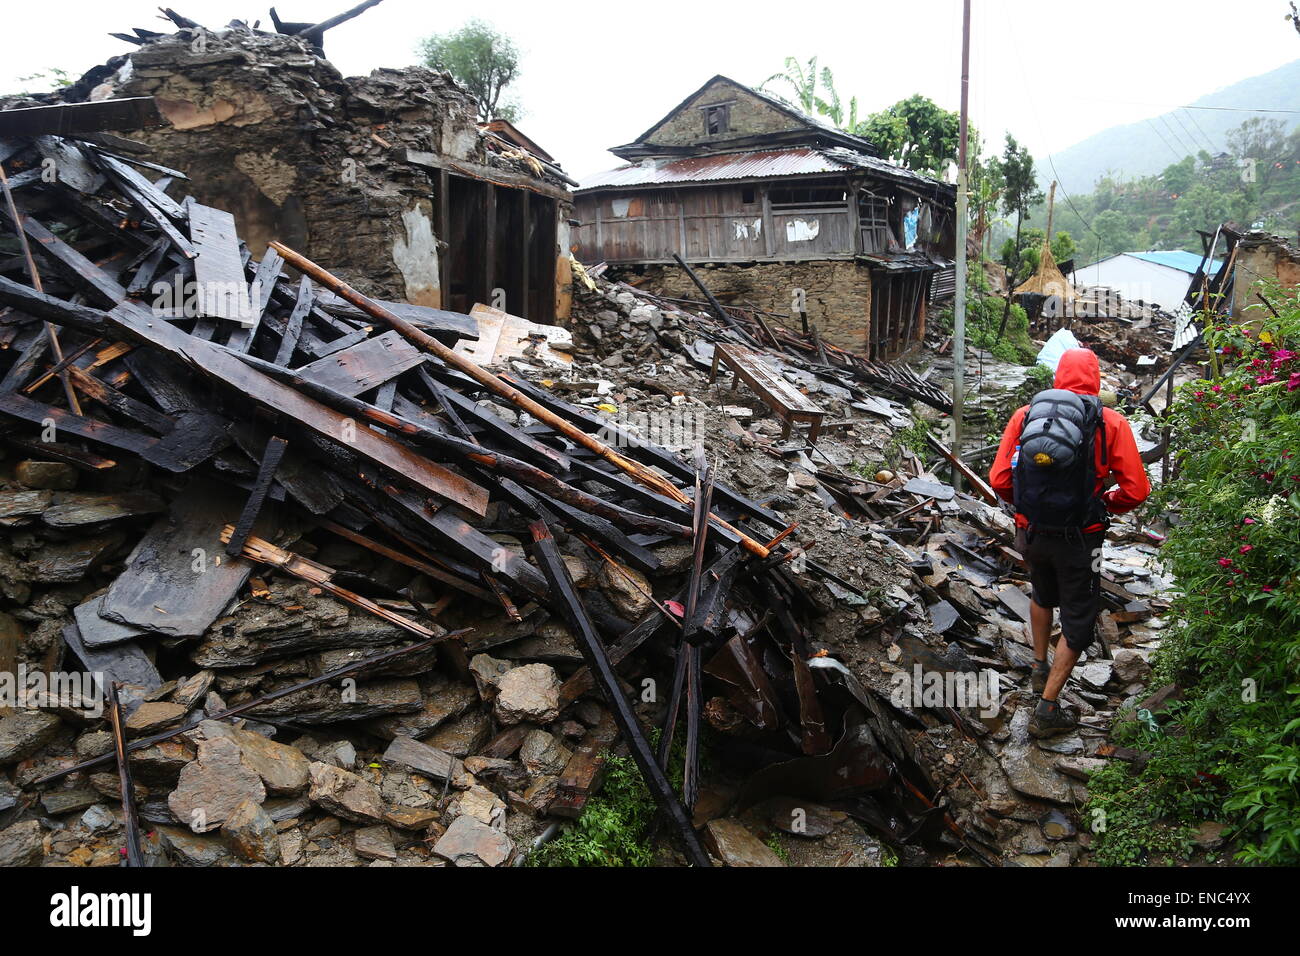 A destroyed house in the region of Saurpani in the Gorkha district, near the epicenter of the earthquake in Nepal, 28 April 2015. German tourist Jordane Schoenfelder and other foreigners have set up a medical and aid camp here for the locals - called base camp - which serves as a starting point for hikes in the surrounding mountains and for shipments of aid packages. Photo: JORDANE SCHOENFELDER/dpa Stock Photo